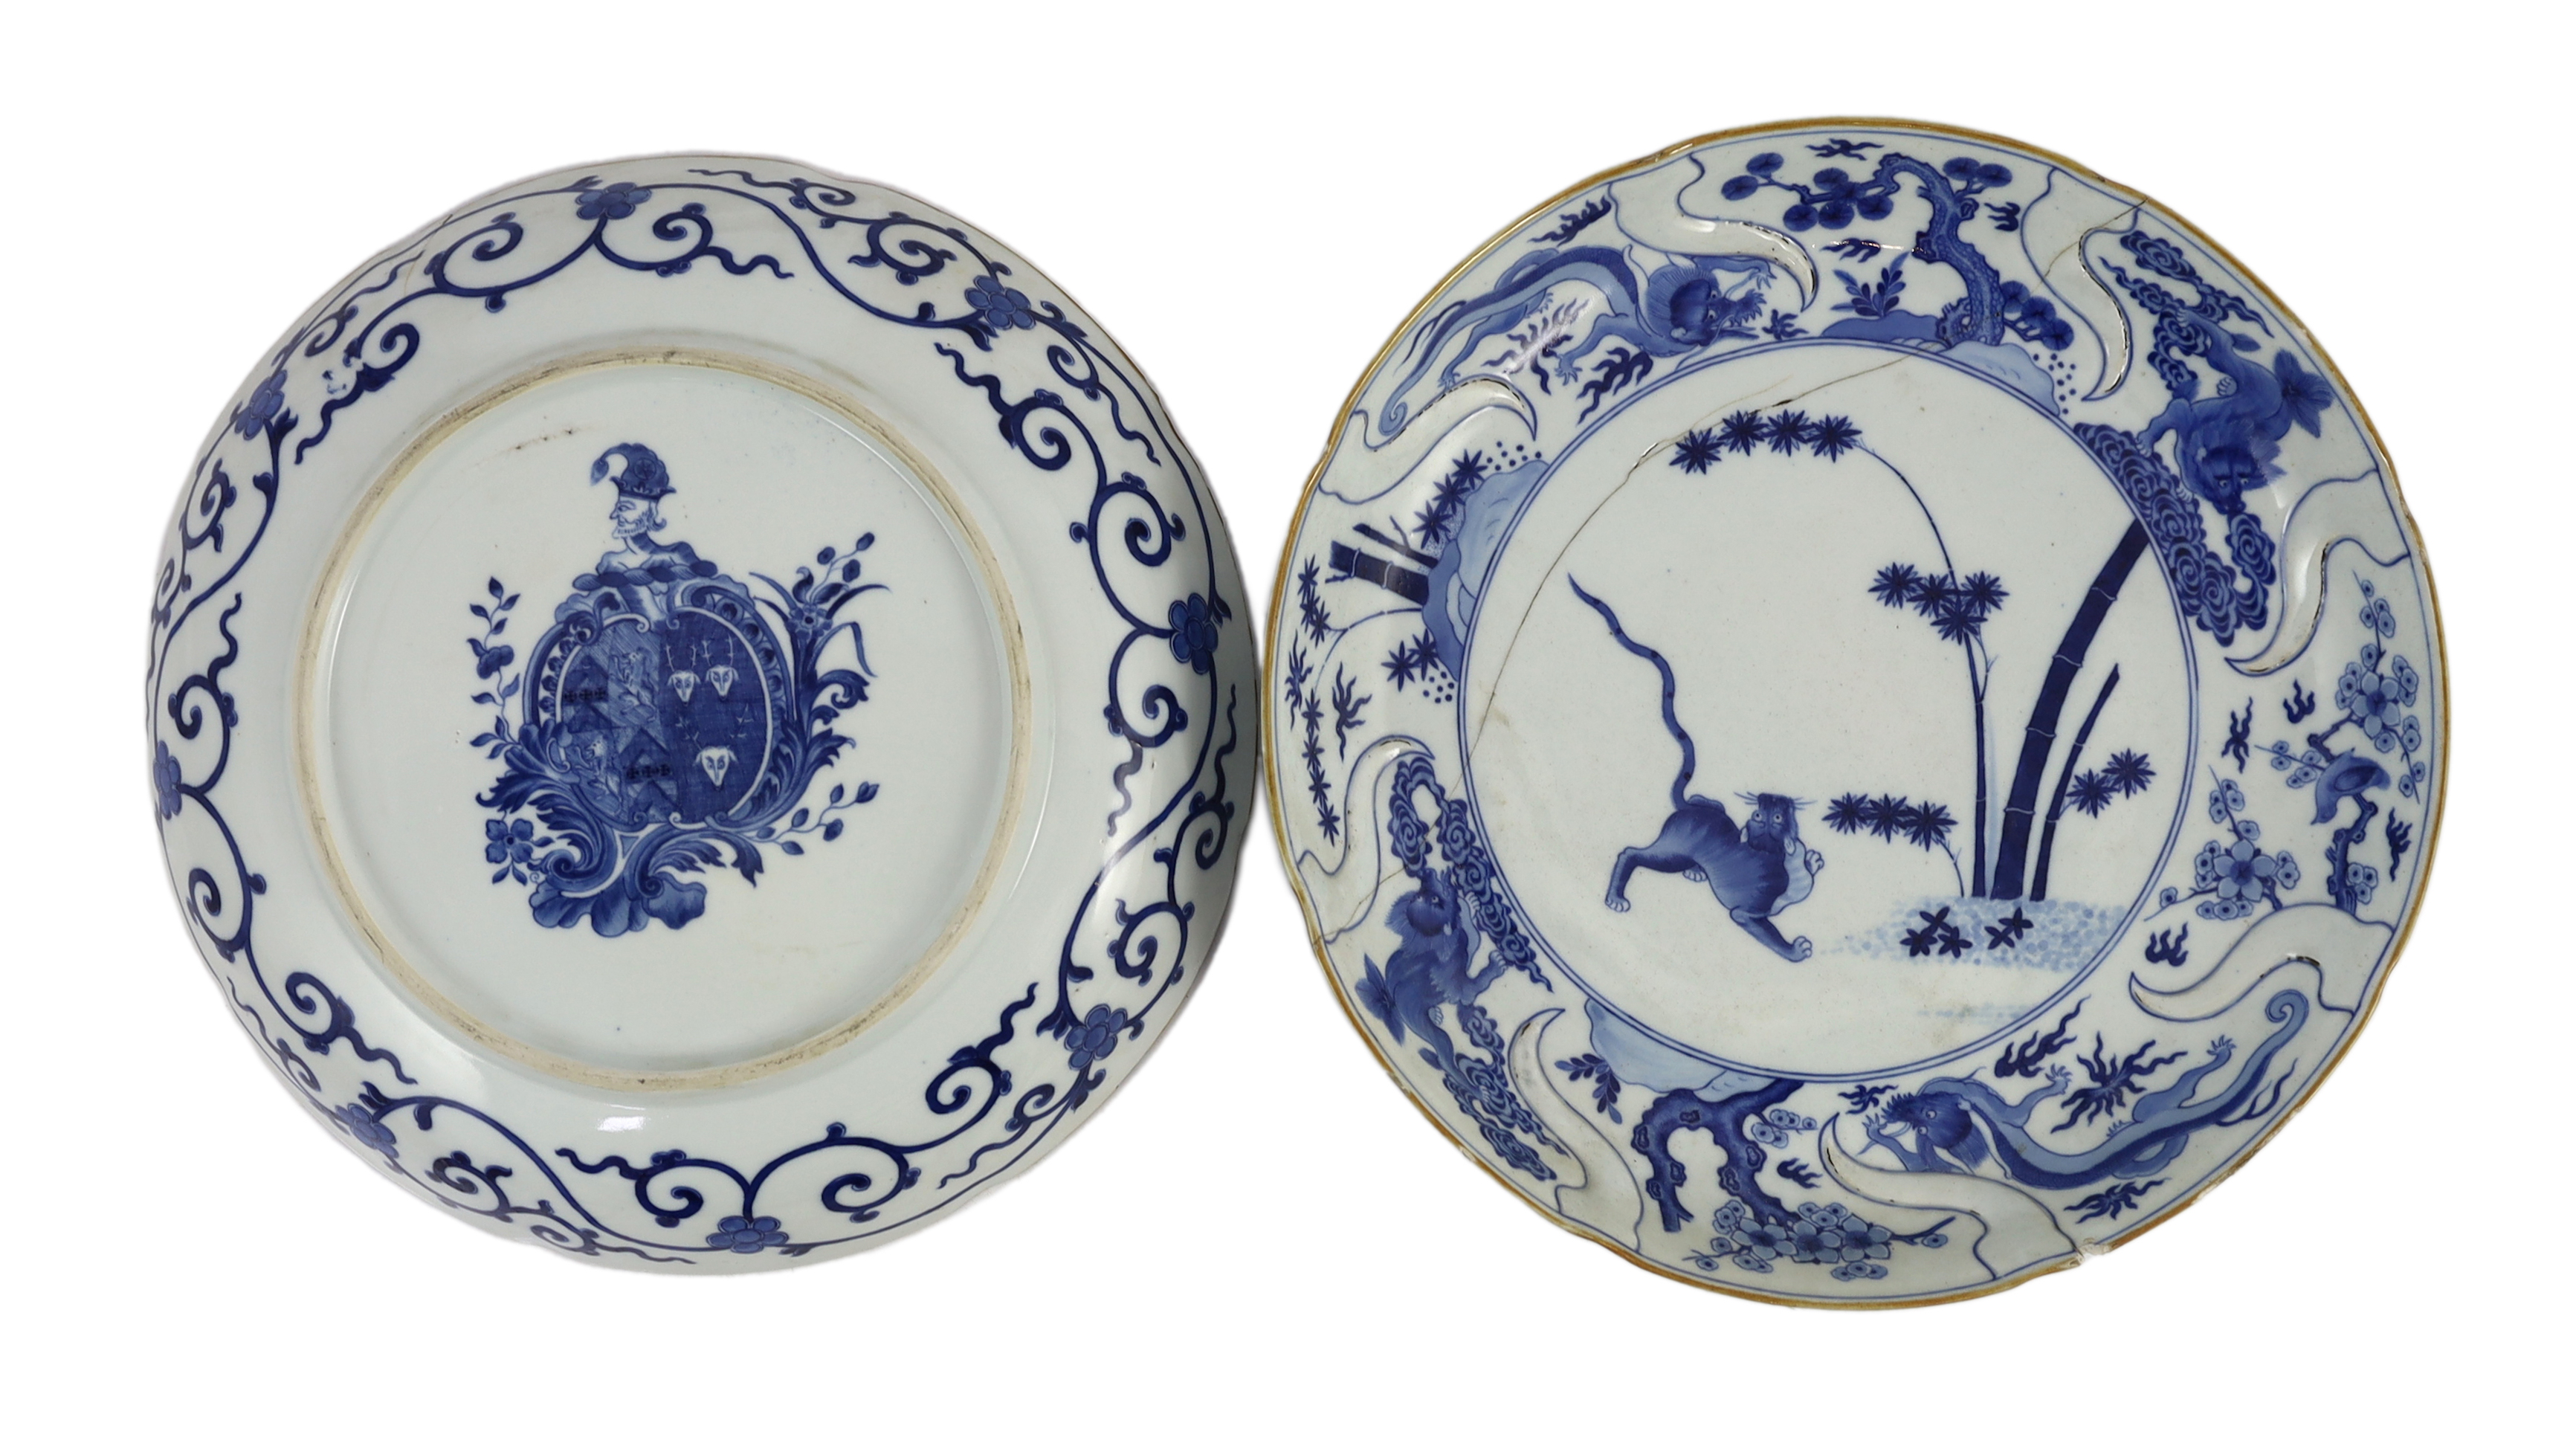 A pair of Chinese blue and white armorial dishes in Japanese Kakiemon style, Qianlong period, c.